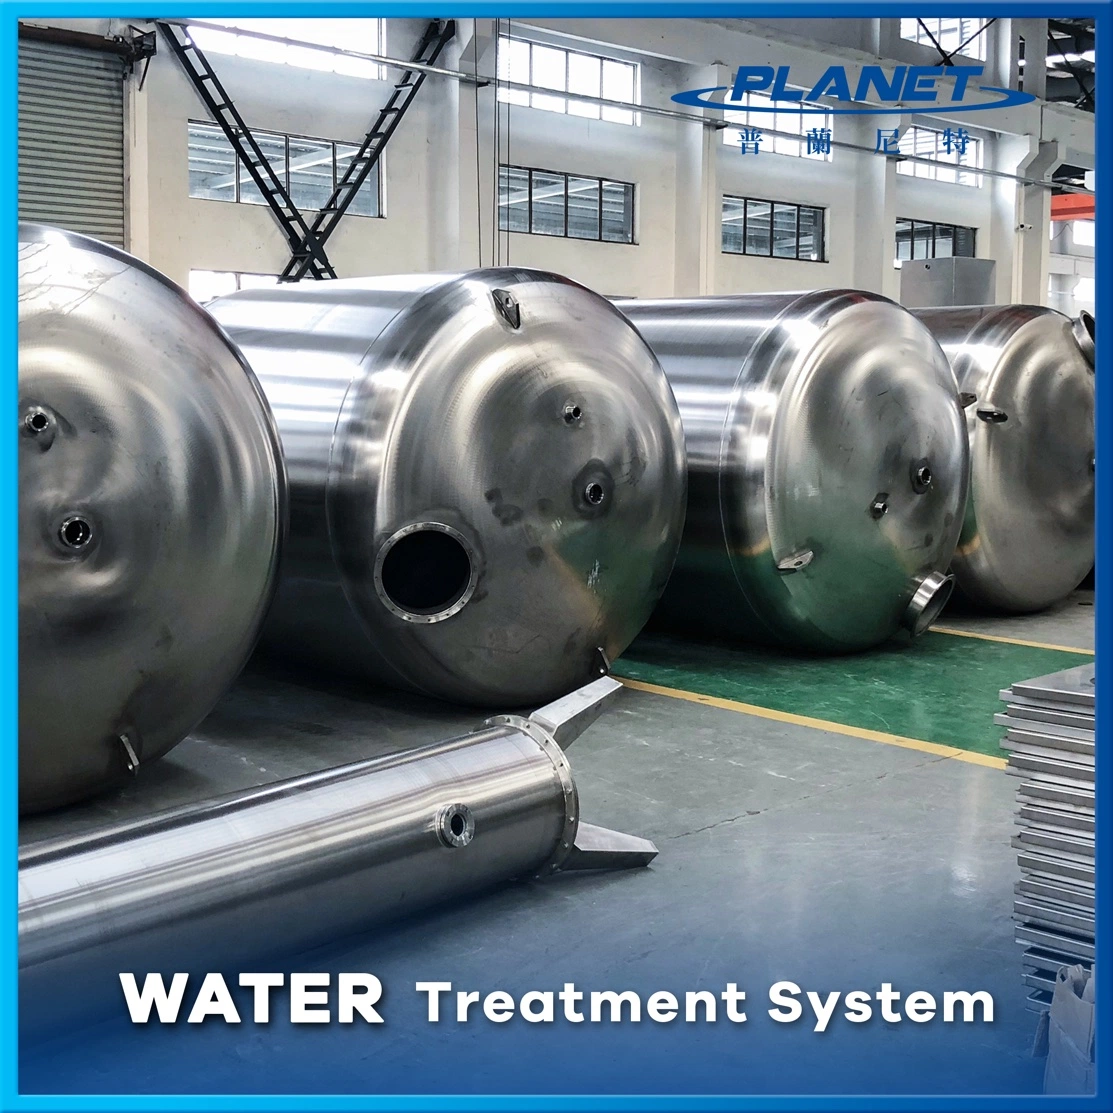 RO Water Drinking Water Desalination Industrial Waste Water Treatment Plant Water Purification Reverse Osmosis Water Filter System Systems Appliances